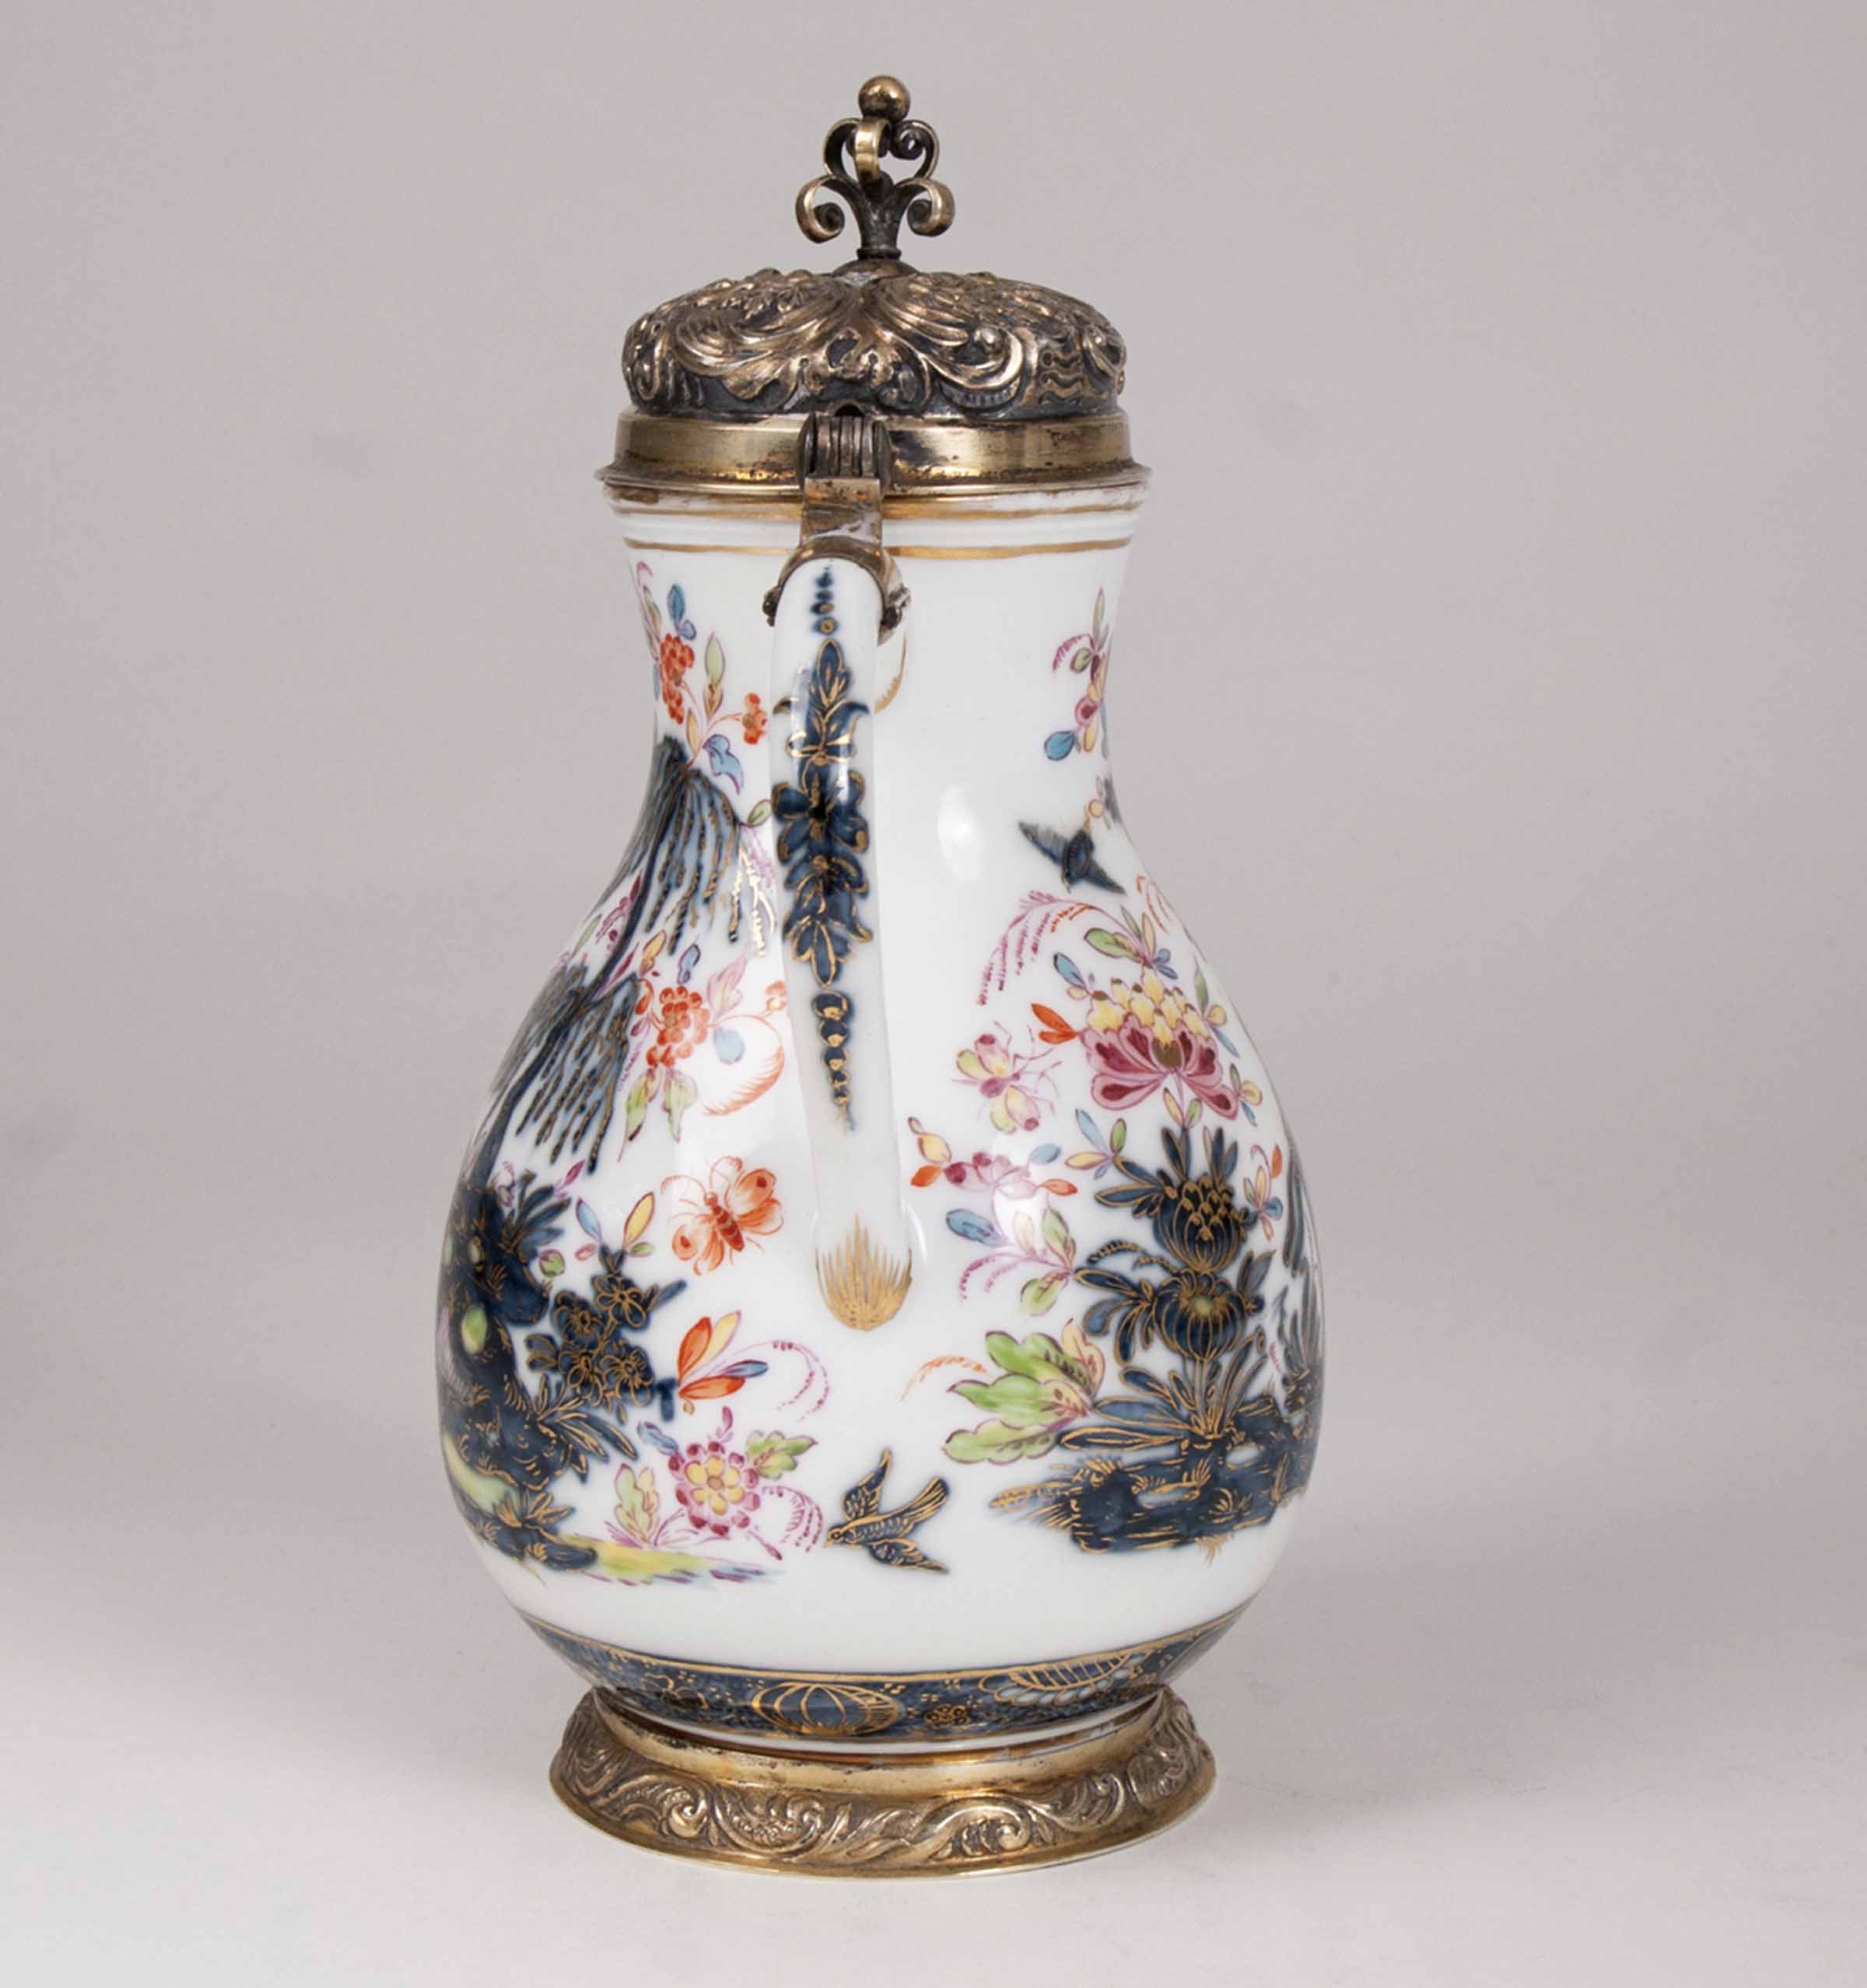 A rare early jug with chinoiserie - image 4